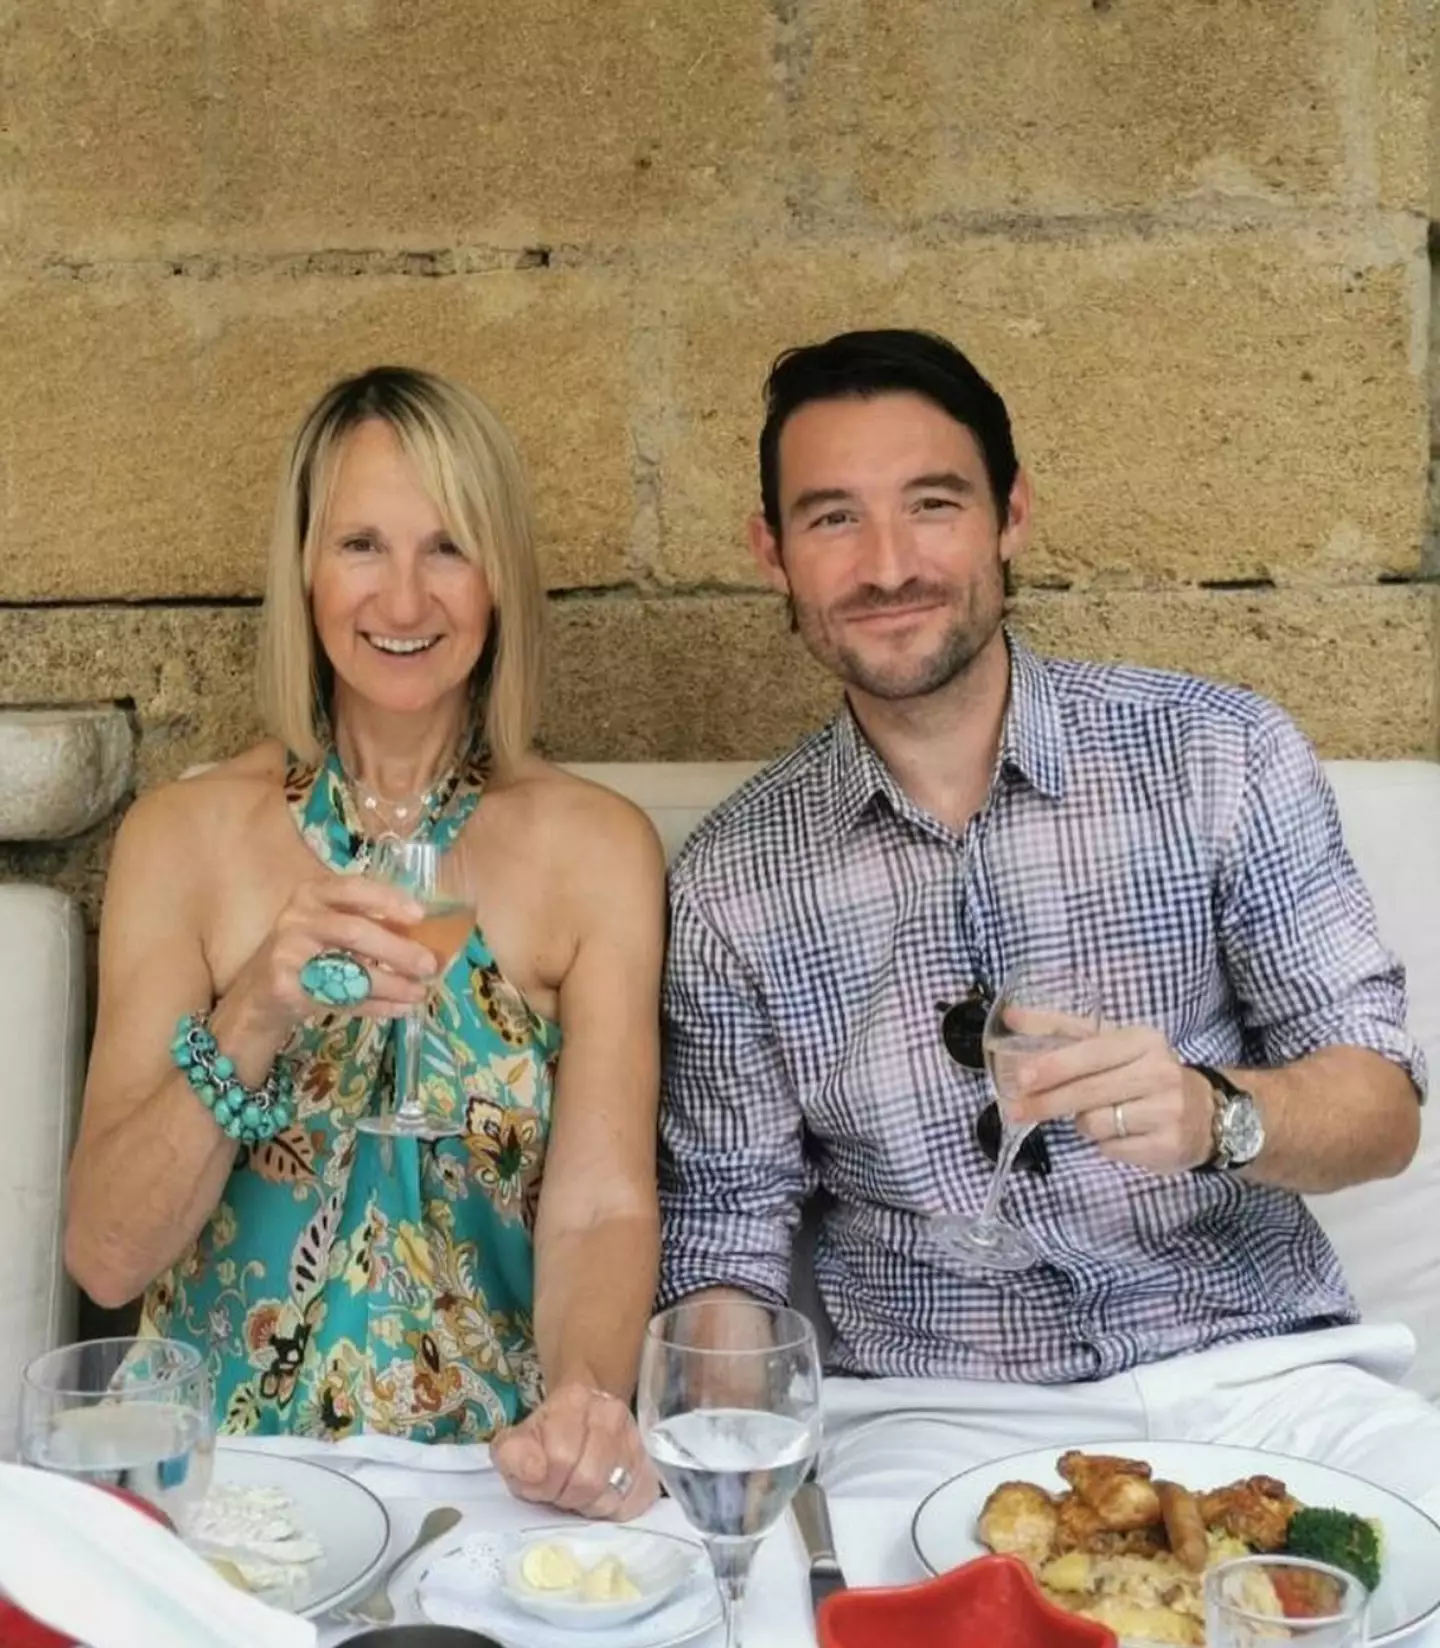 The couple revisited a restaurant in the South of France.